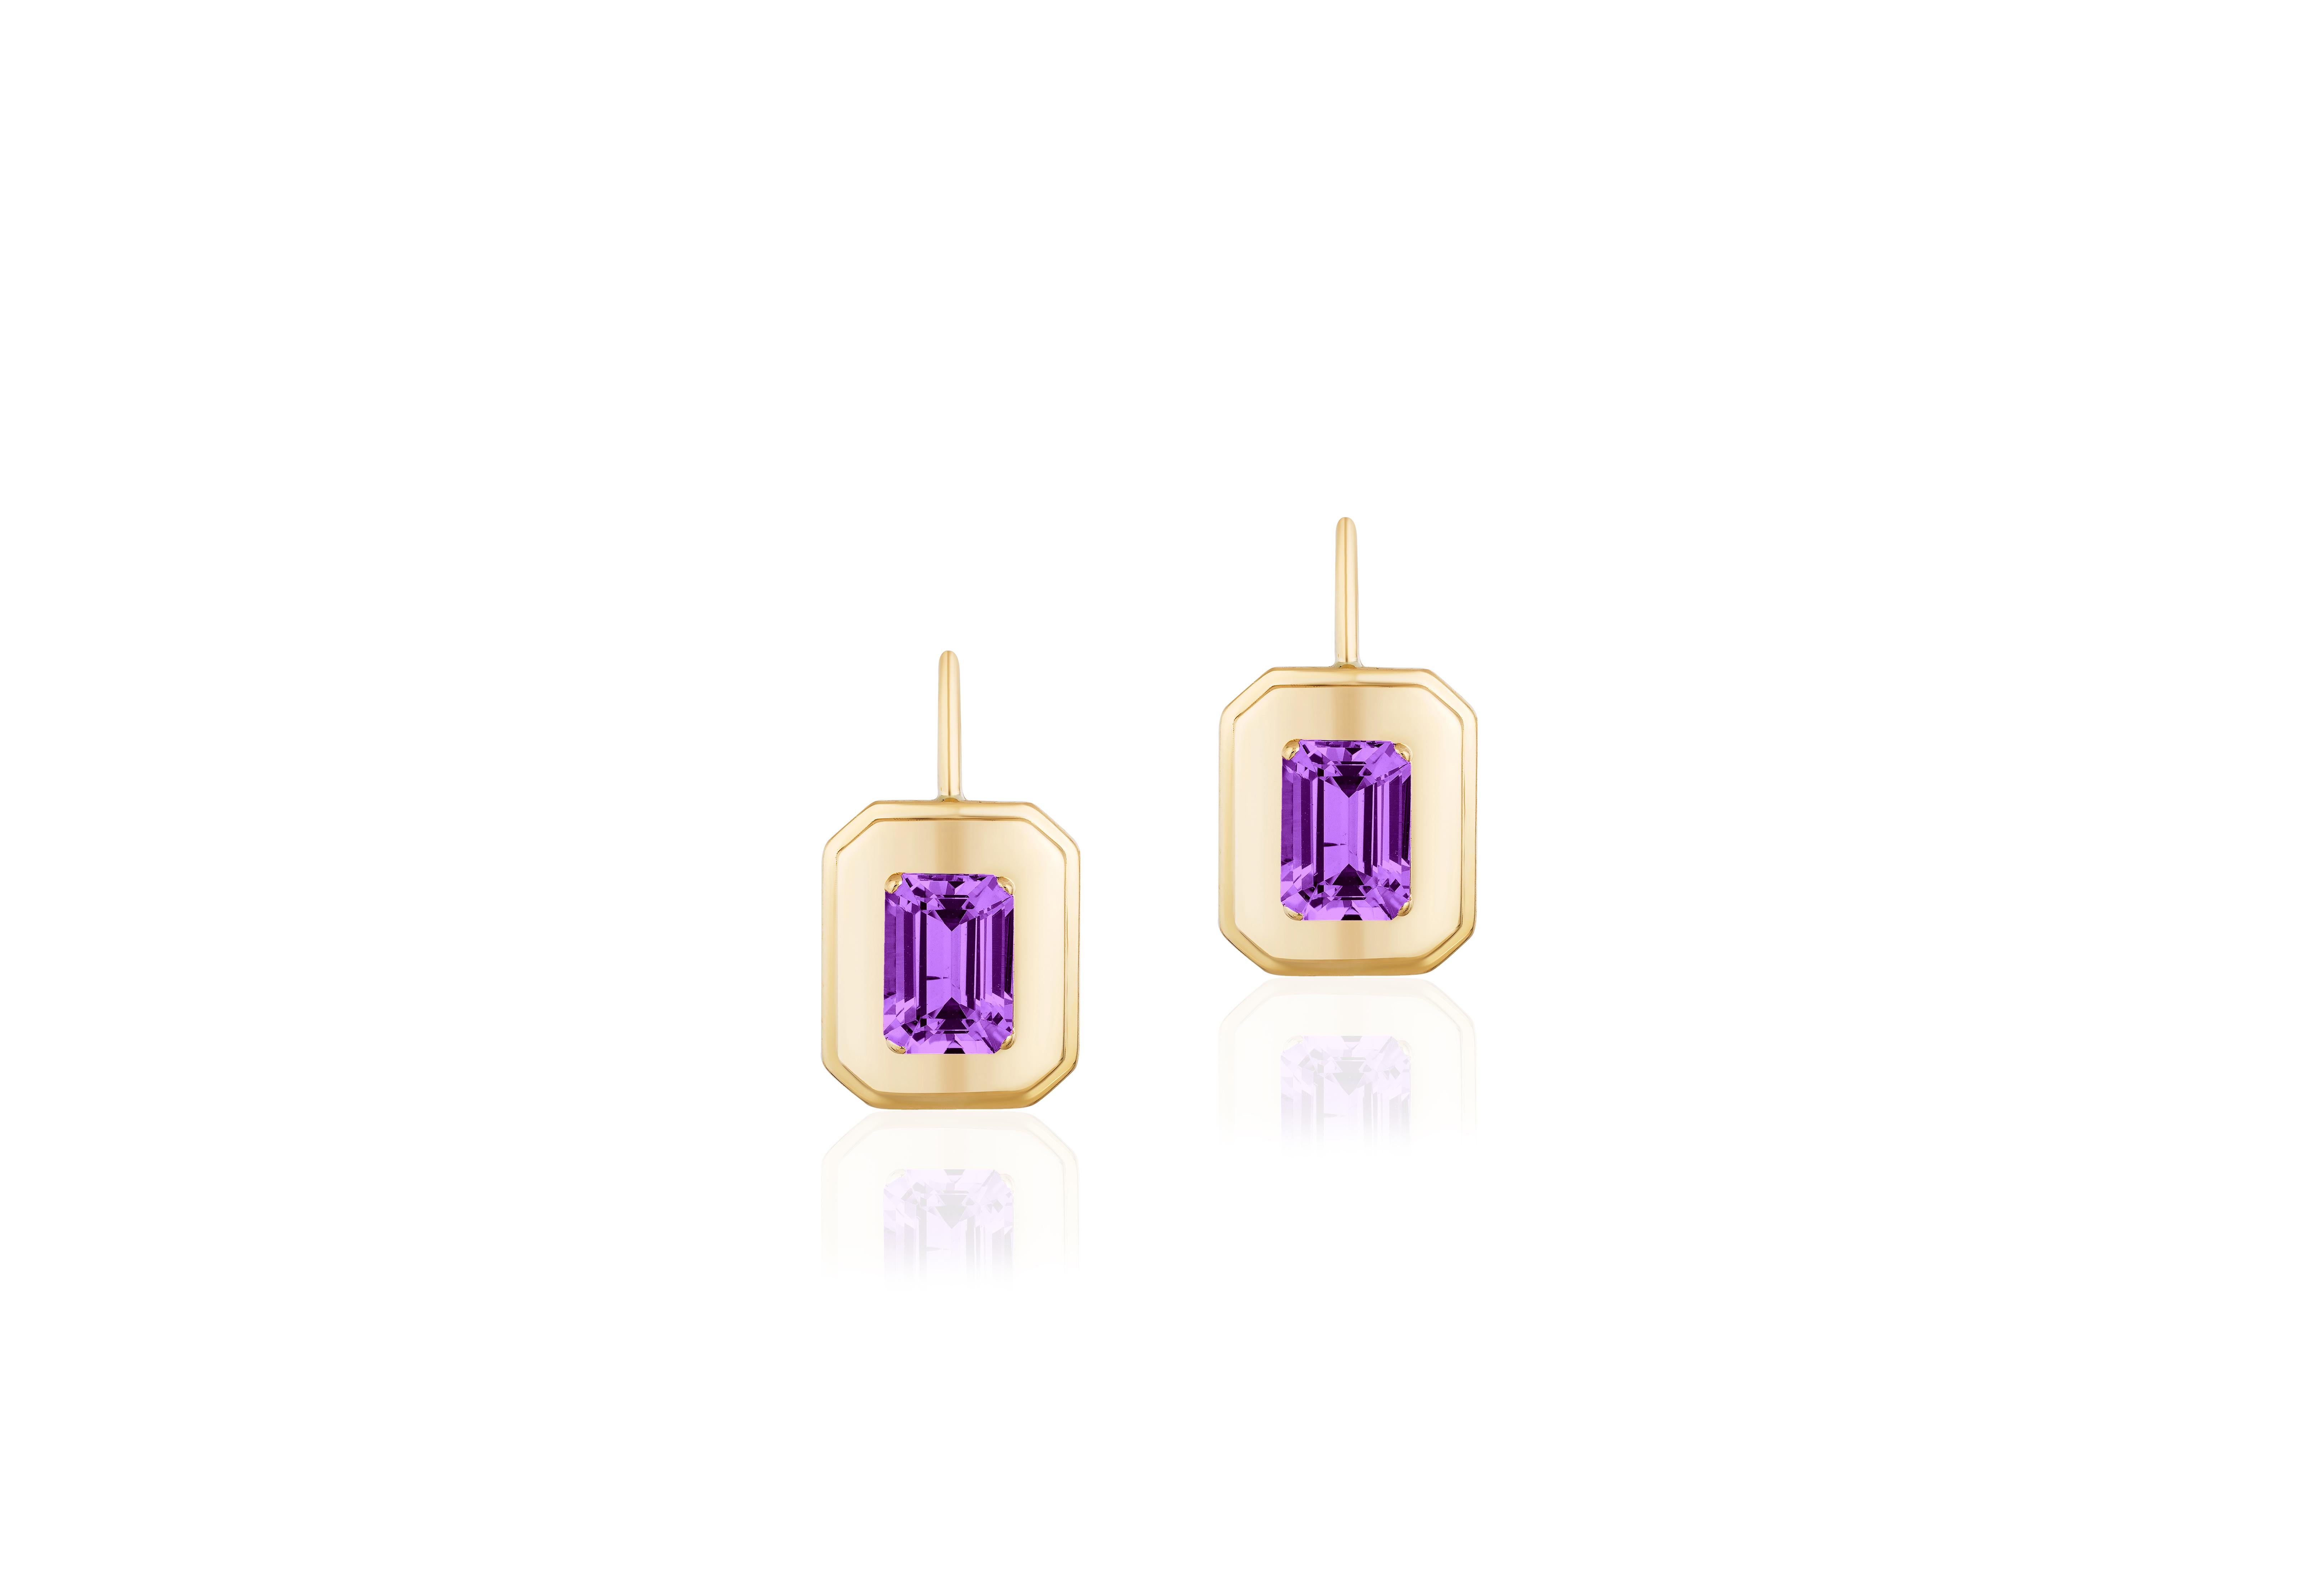 These unique earrings are an Amethyst Emerald Cut, with Lever back. From our ‘Queen’ Collection, it was inspired by royalty, but with a modern twist. The combination of Gold, and Amethyst represents power, richness and passion of a true Queen. The